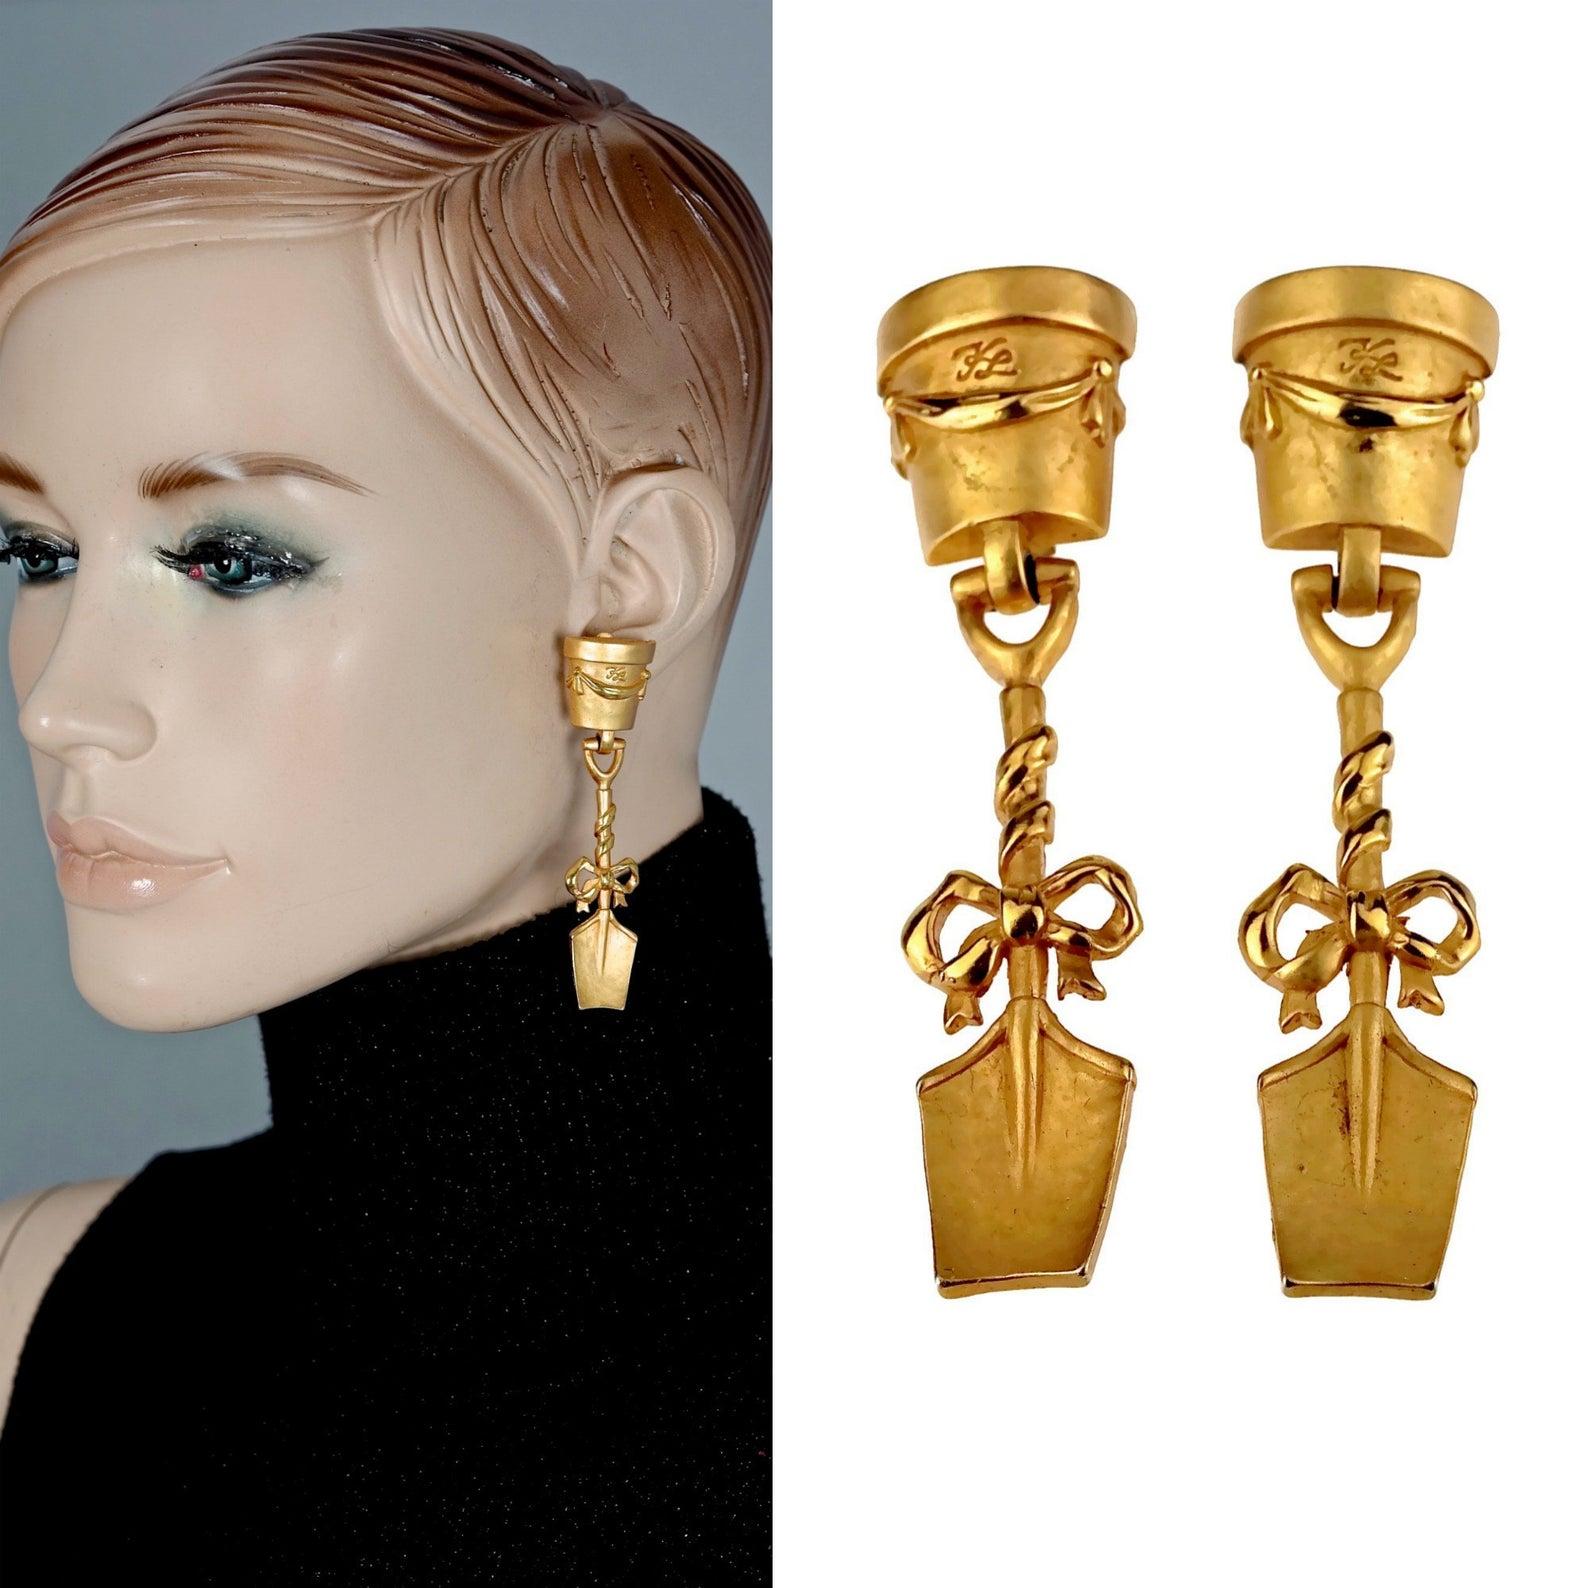 Vintage KARL LAGERFELD Flower Pot Shovel Gardening Novelty Earrings

Measurements:
Height: 3.07 inches (7.8 cm)
Width: 0.70 inch (1.8 cm)
Weight: 17 grams

Features:
- 100% Authentic KARL LAGERFELD.
- Garden motif earrings with flower pot and